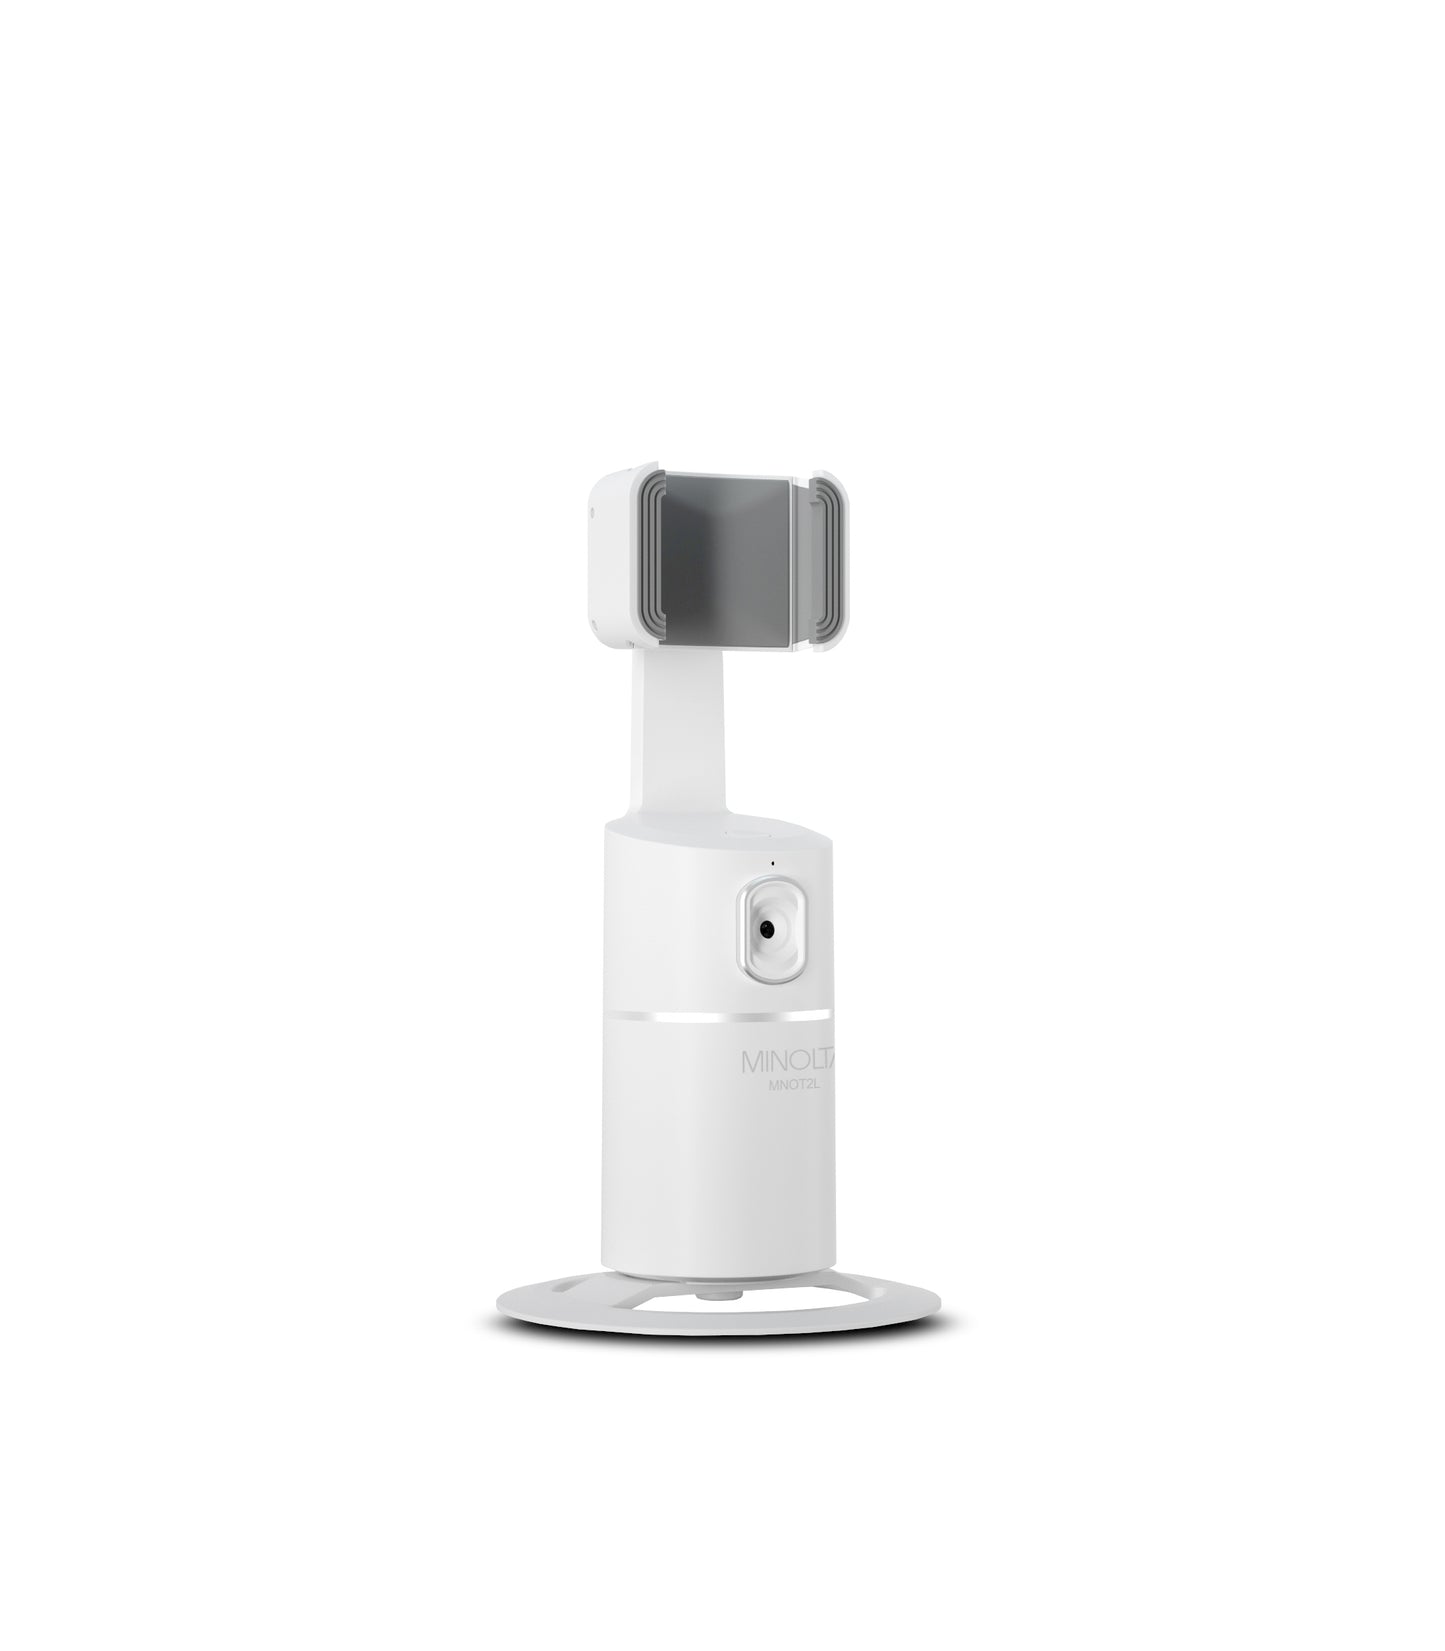 MNOT2L Smart Face-Tracking Mount System